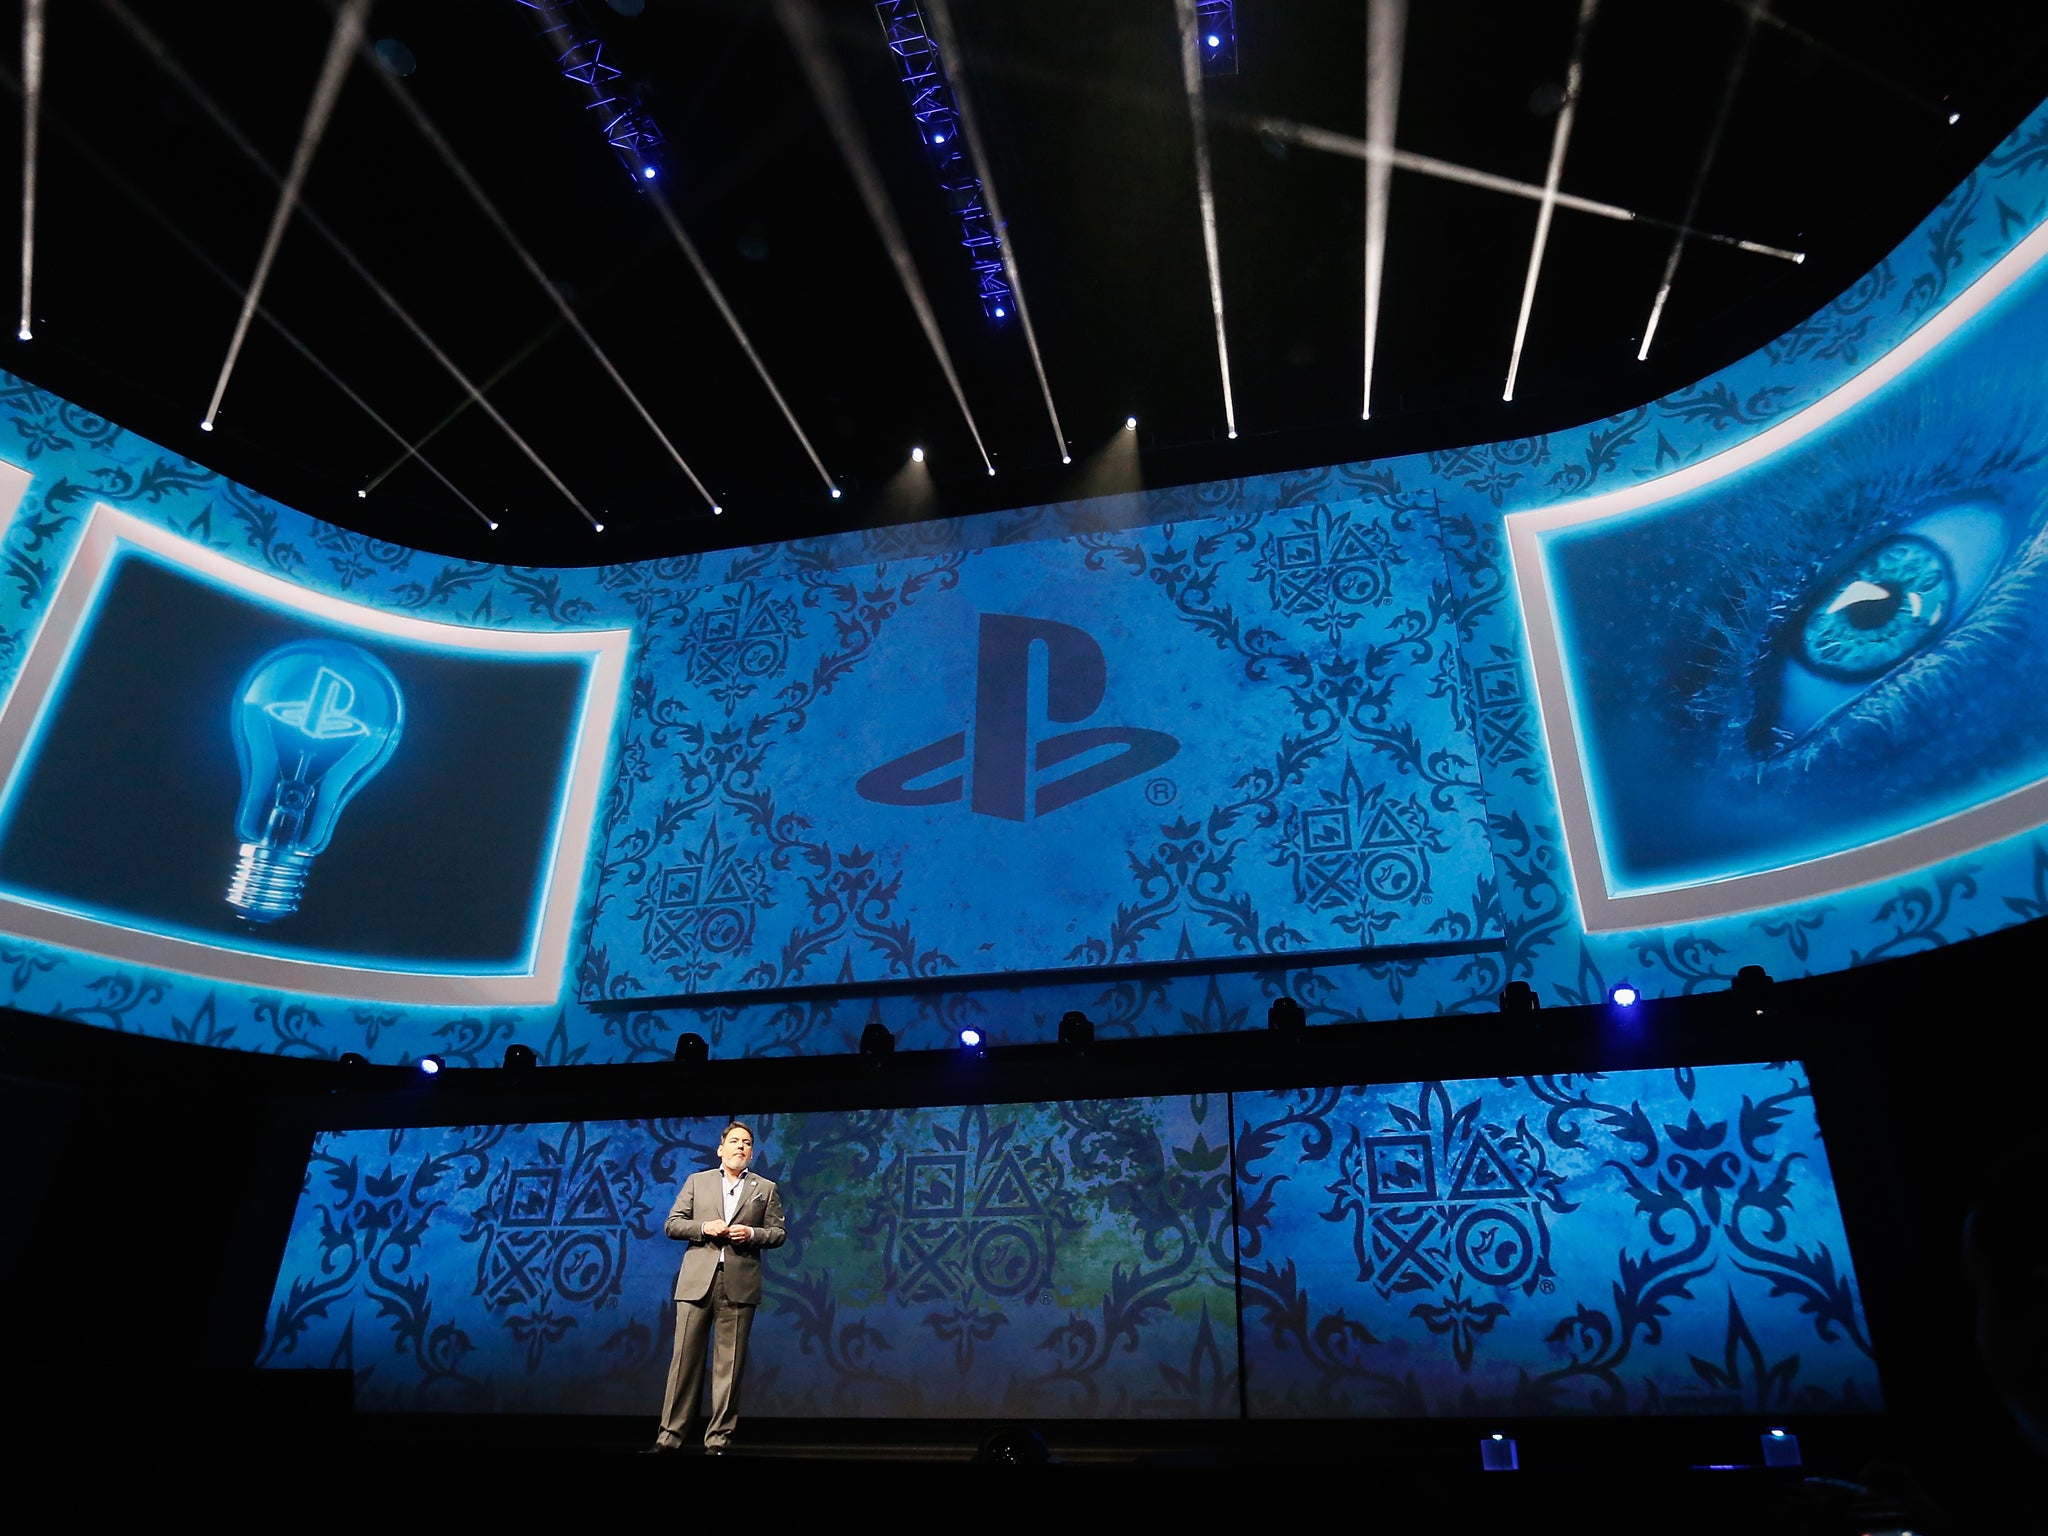 President and CEO at Sony Computer Entertainment America, Shawn Layden speaks during the Sony E3 press conference at the L.A. Memorial Sports Arena on June 15, 2015 in Los Angeles, California.